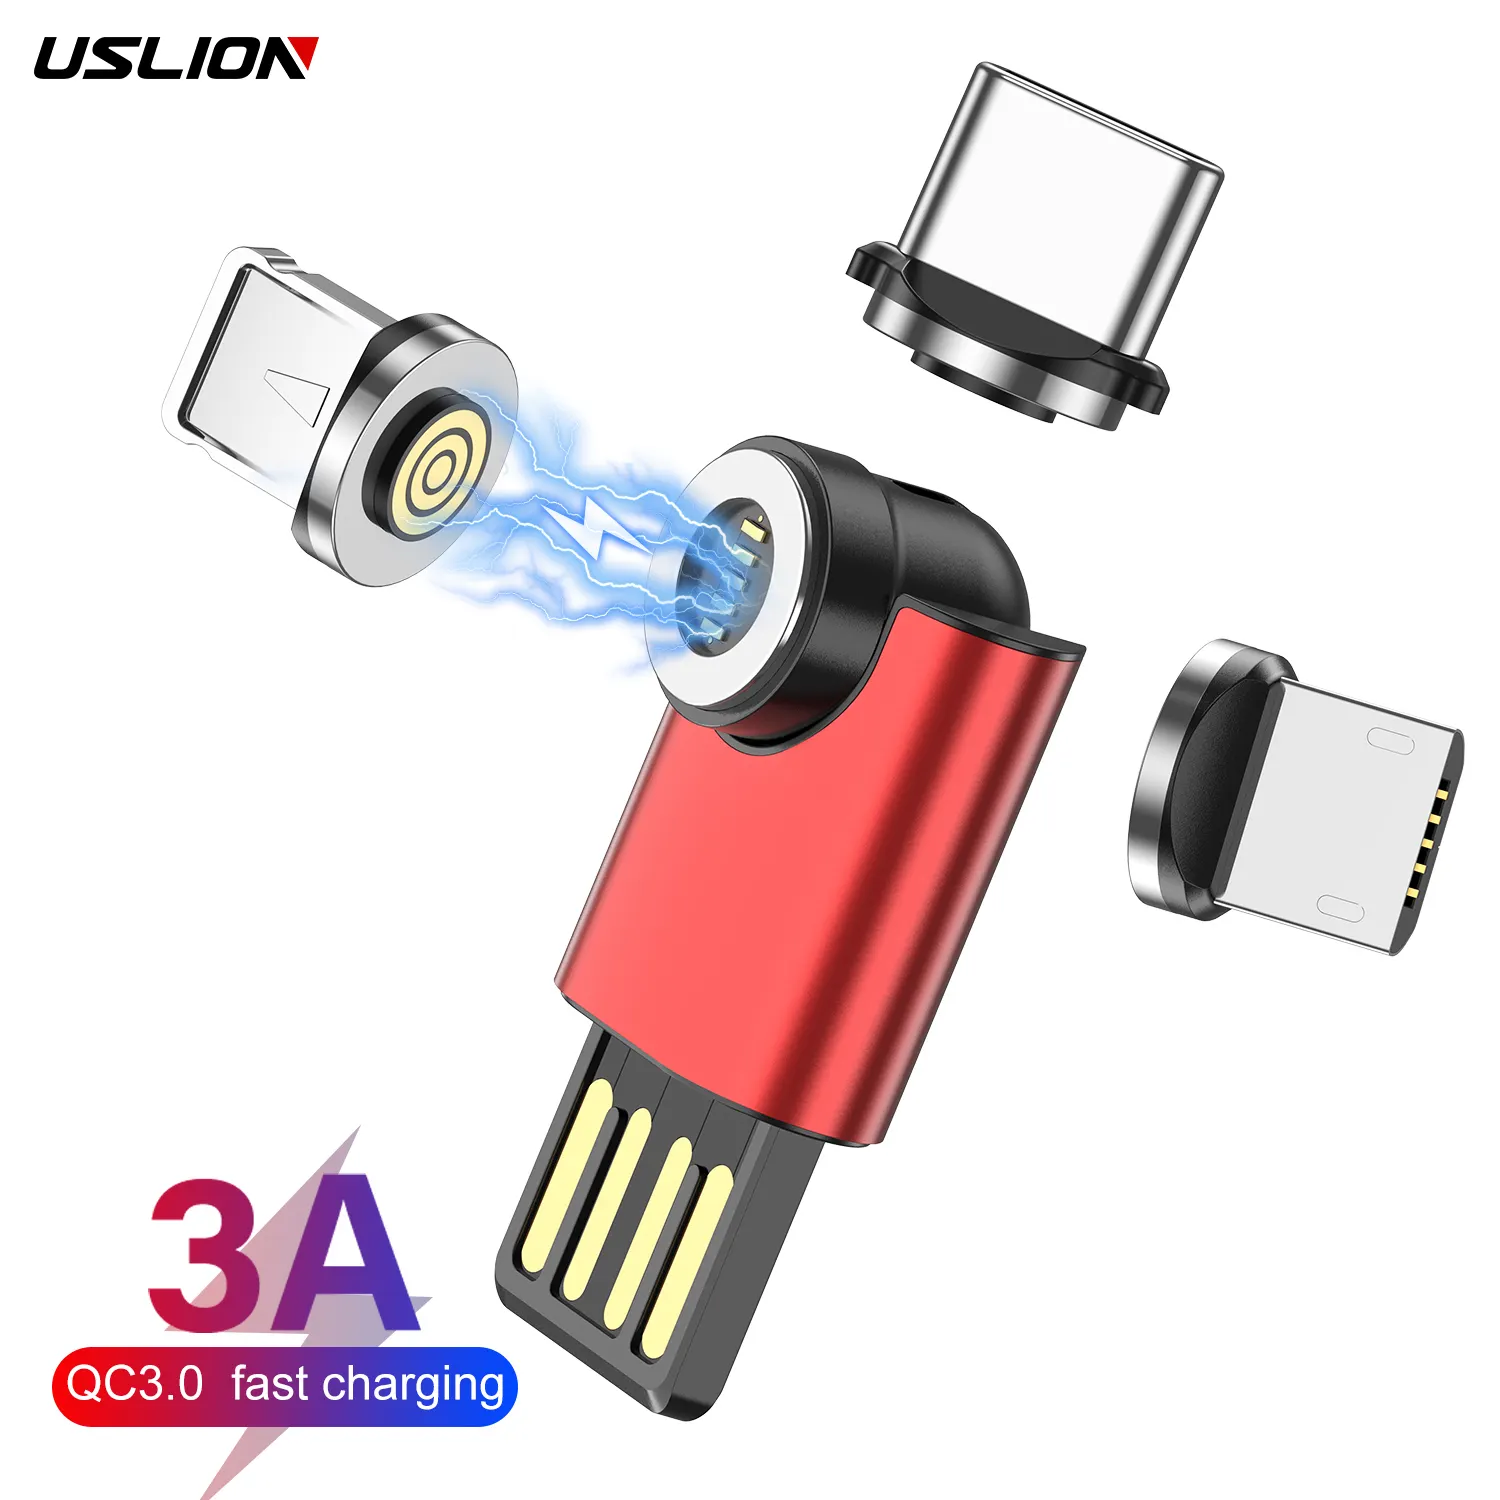 USLION Mini 540 Rotation 3 in 1 Magnetic Charger Mobile Phone Adapter USB Type C Converter Data Cable for iphone Huawei Samsung